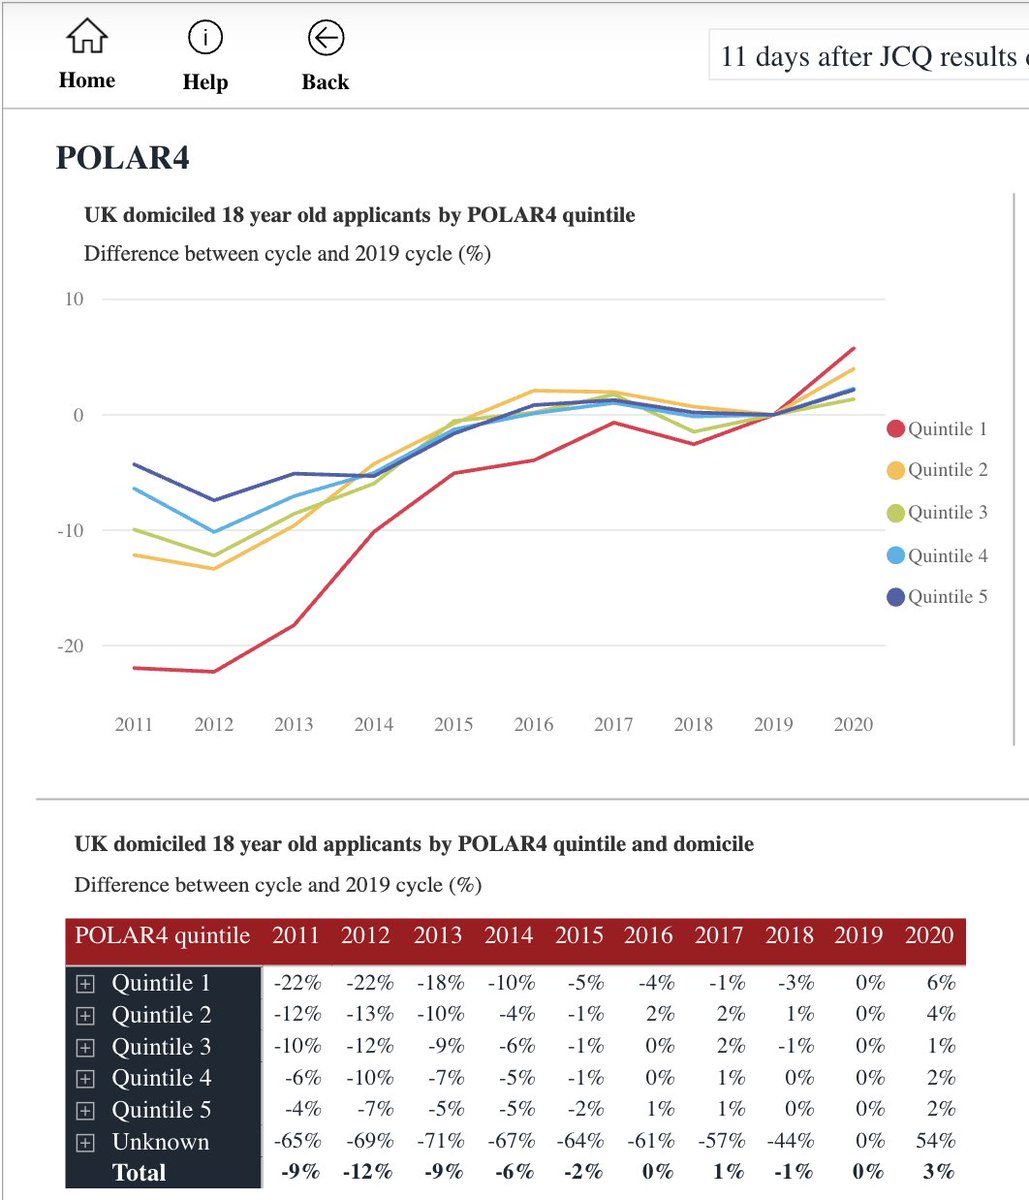 +5% and +3% increases in Polar Q1 and Q2 respectively on Friday (most under-represented groups in HE) has improved to +6% (Q1) and +4% (Q2) today - so universities have made room for more disadvantaged applicants - 590 more since Friday